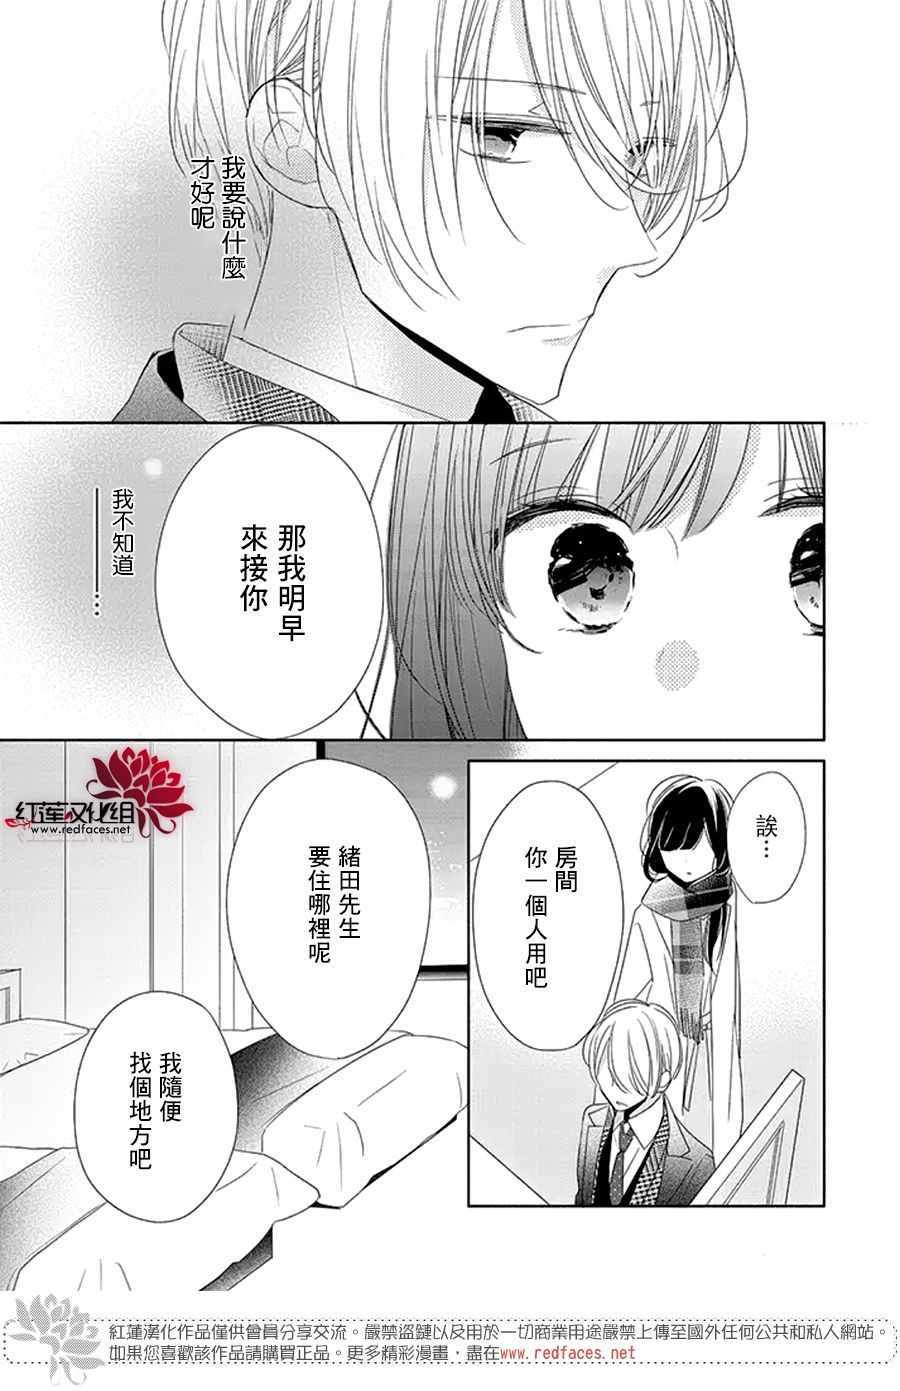 If given a second chance - 20话 - 3